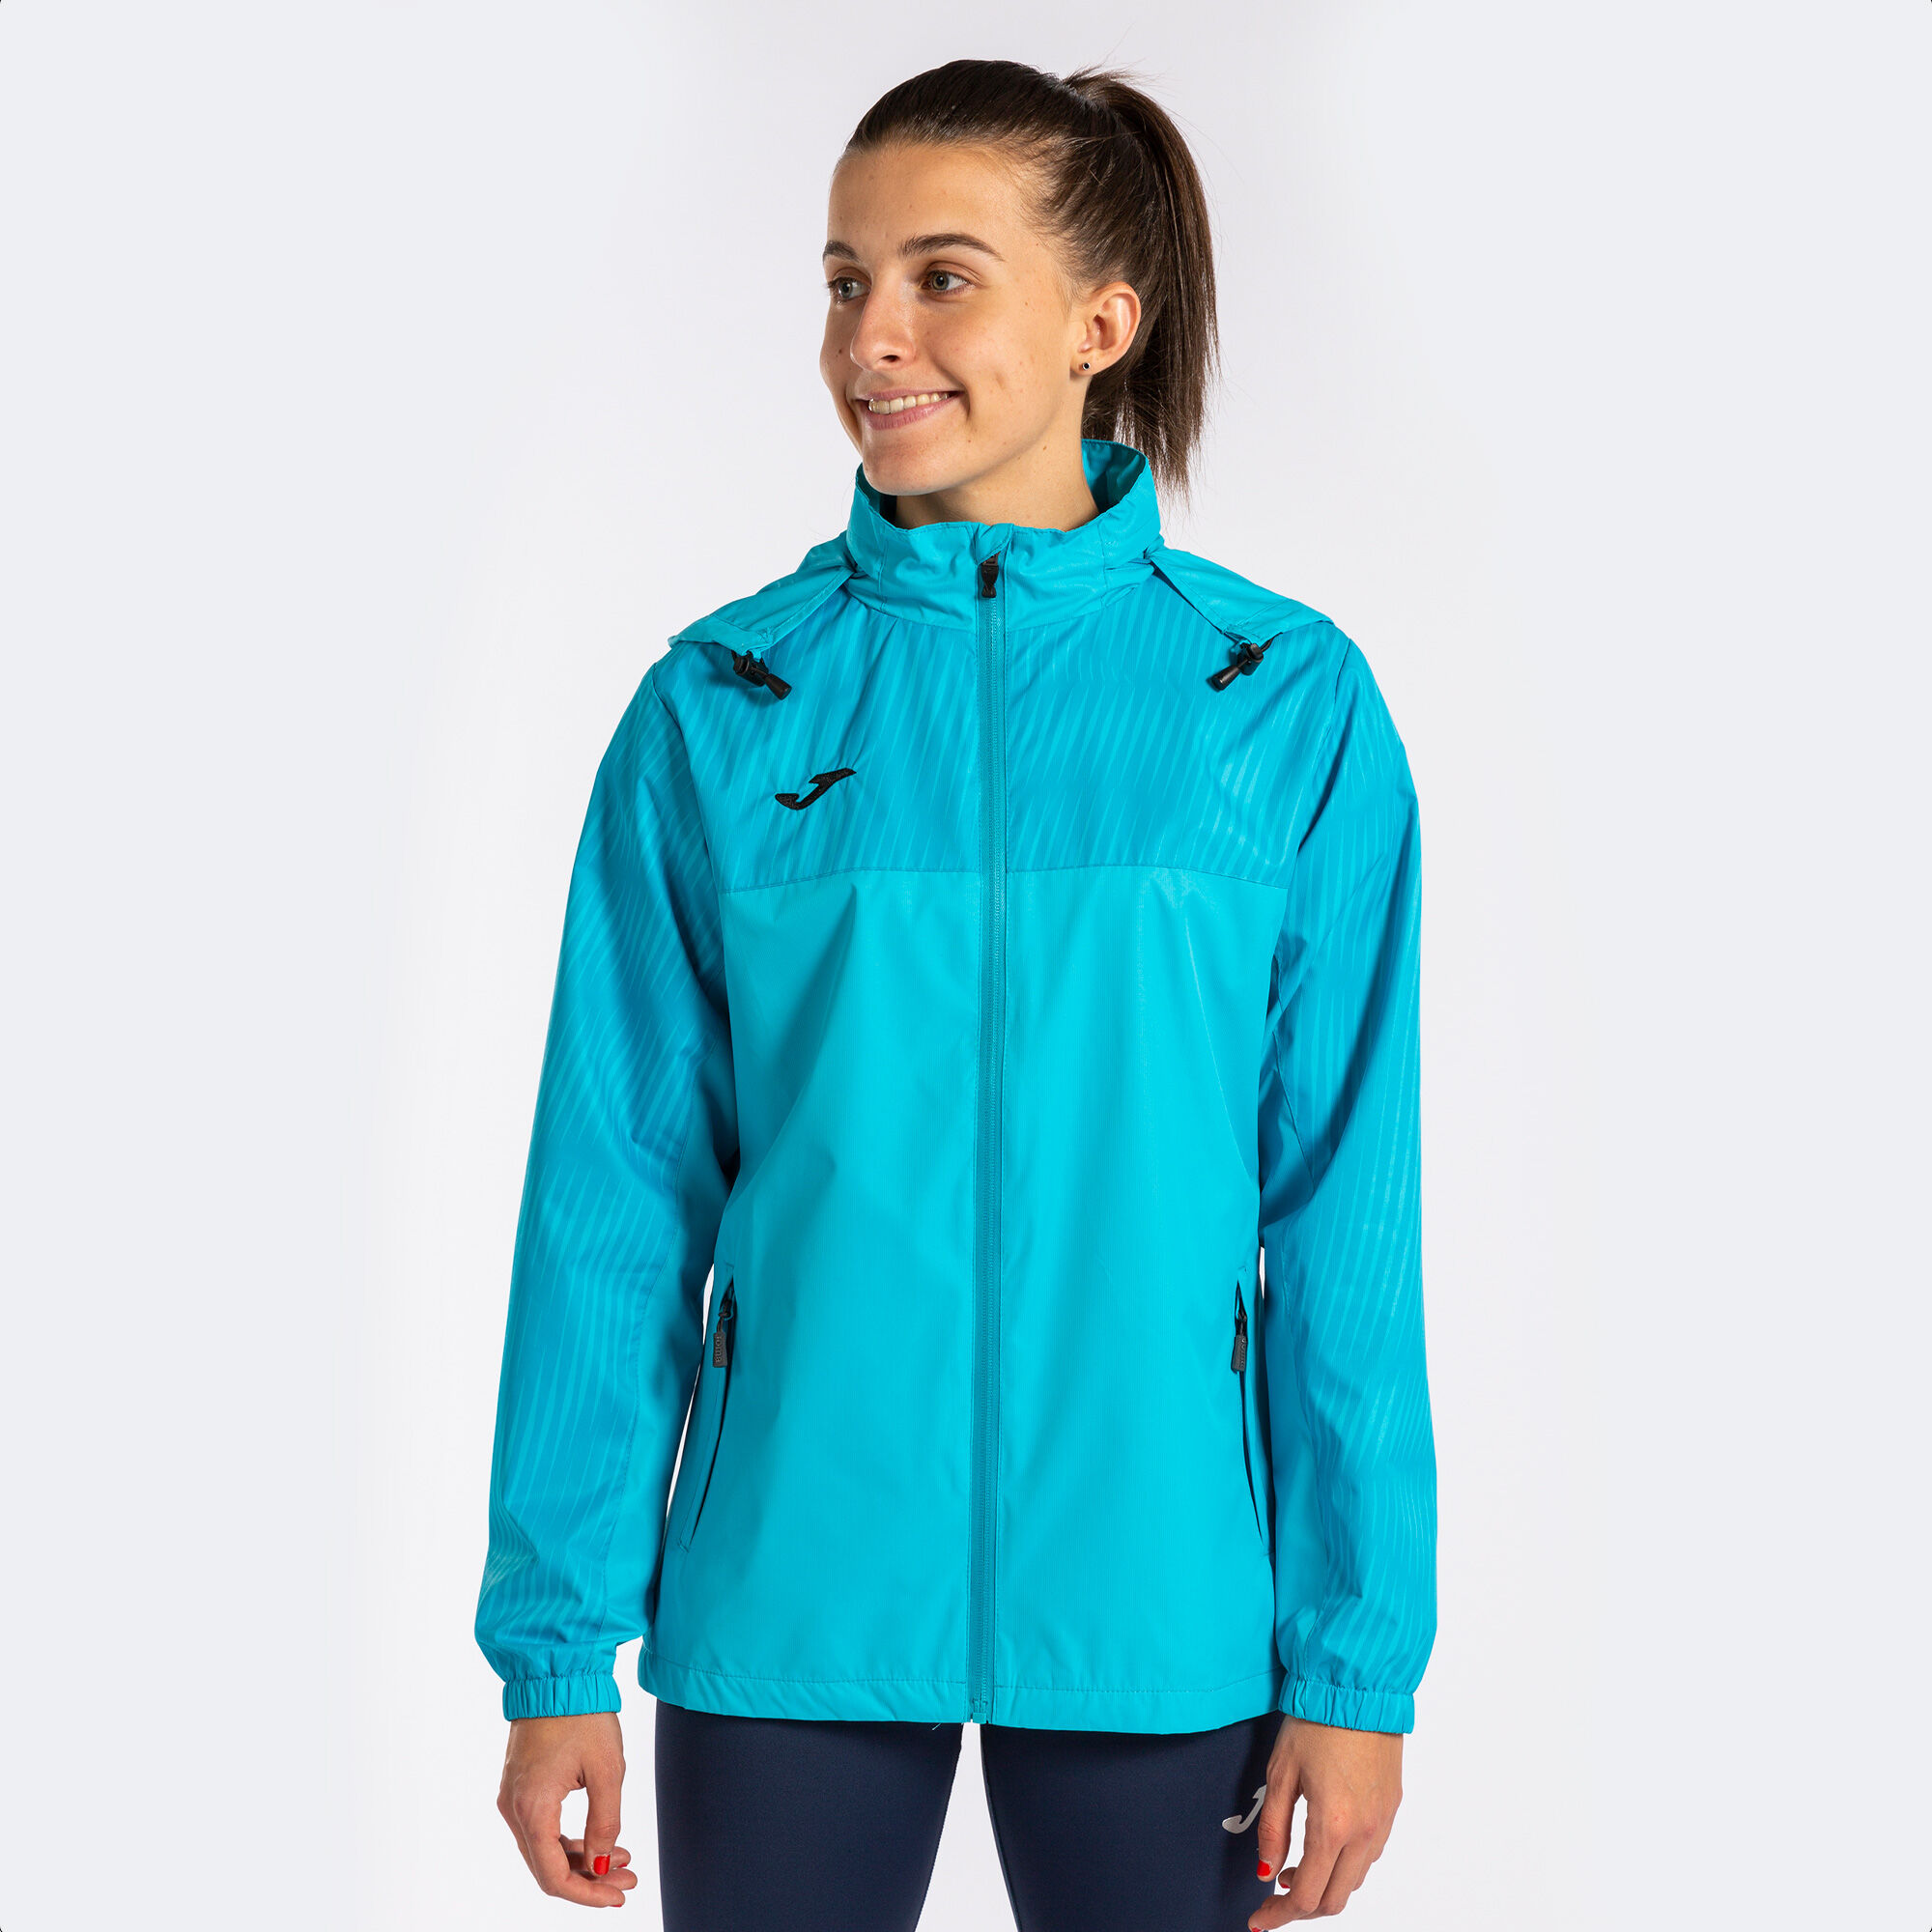 IMPERMÉABLE FEMME MONTREAL TURQUOISE FLUO